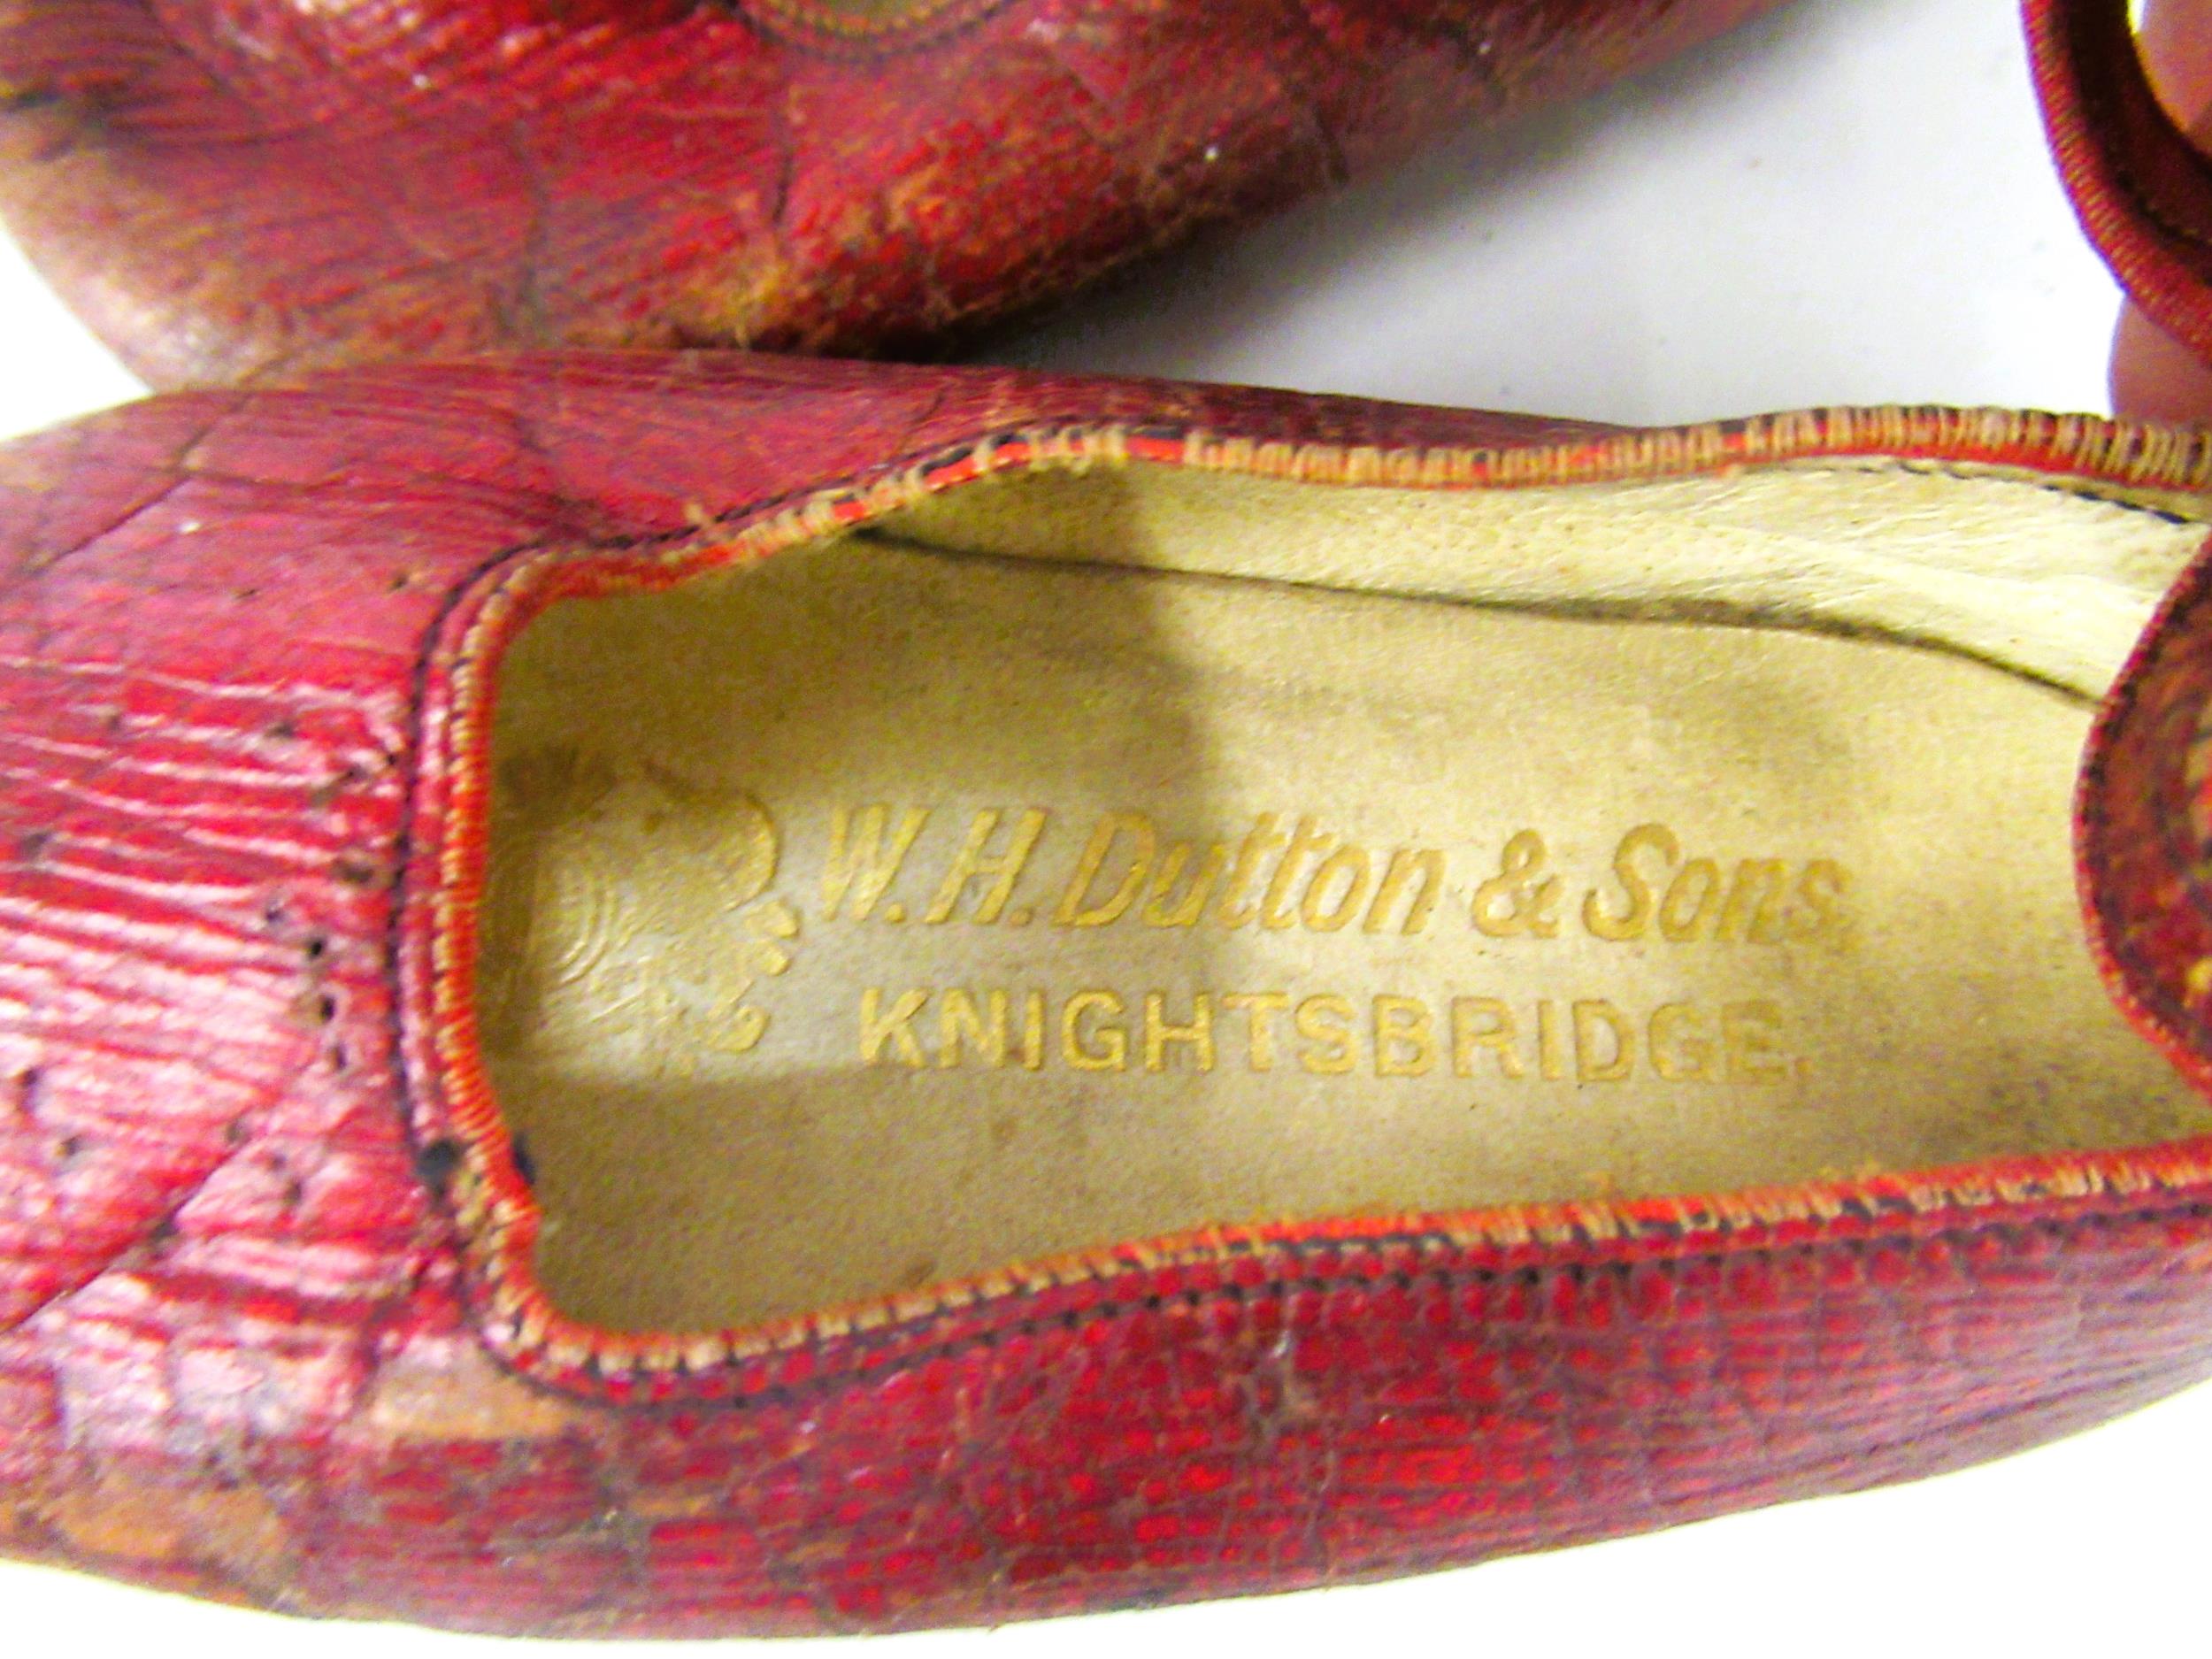 Pair of late 19th / early 20th Century child's red leather shoes by W.H. Dutton & Sons, - Image 3 of 3